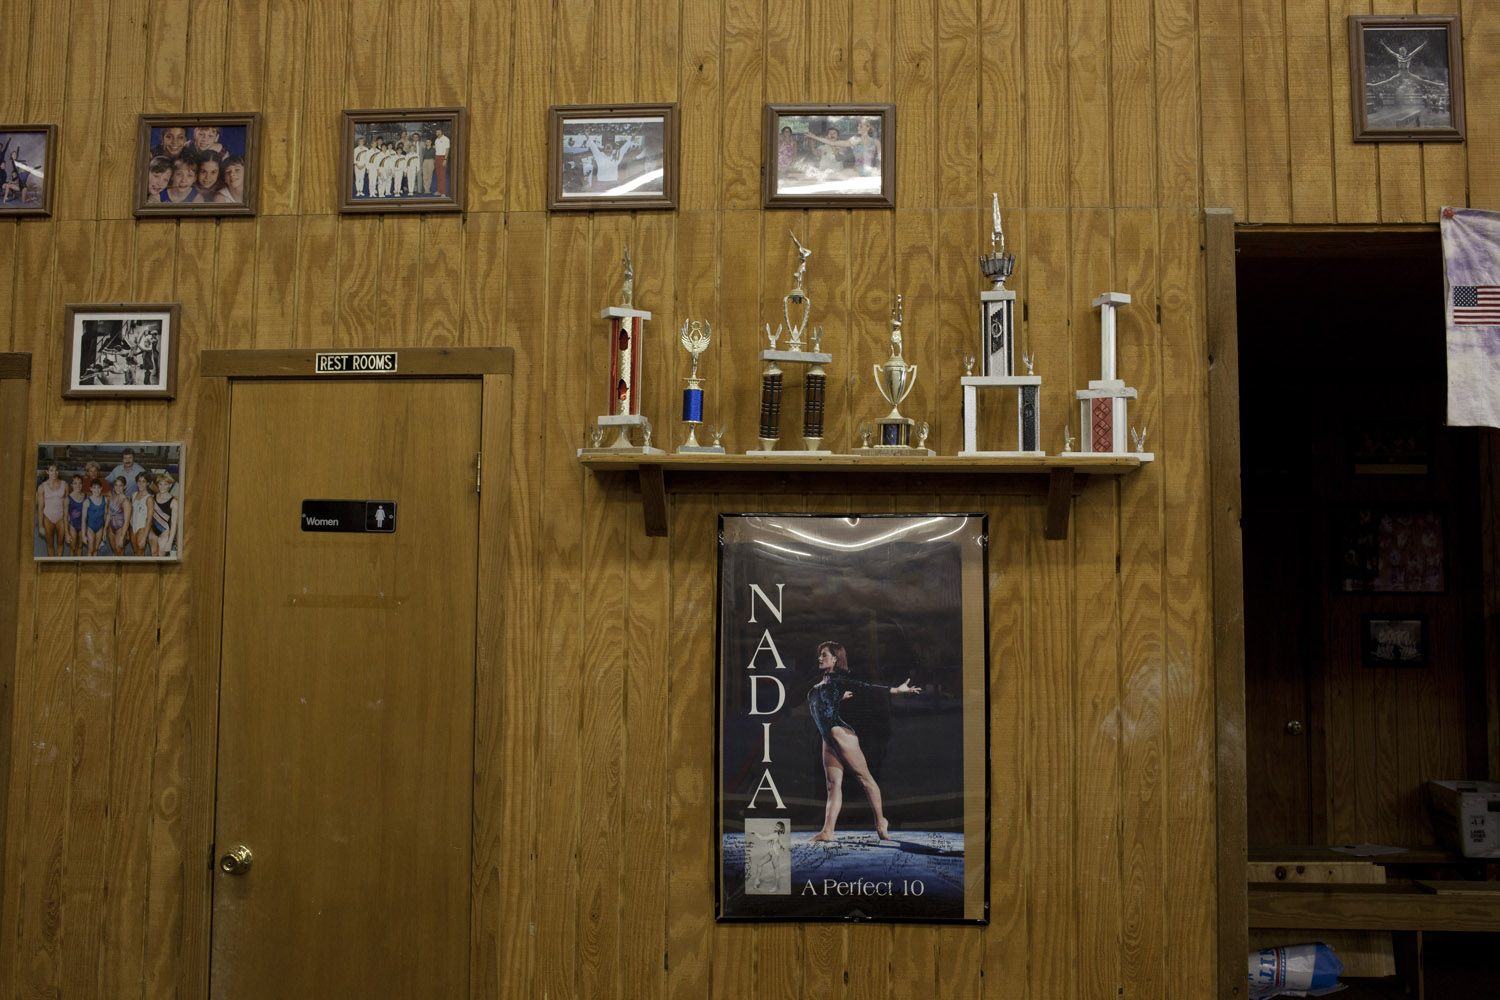 A wall displays mementos from past Olympians groomed for victory at Karolyi's Camp.